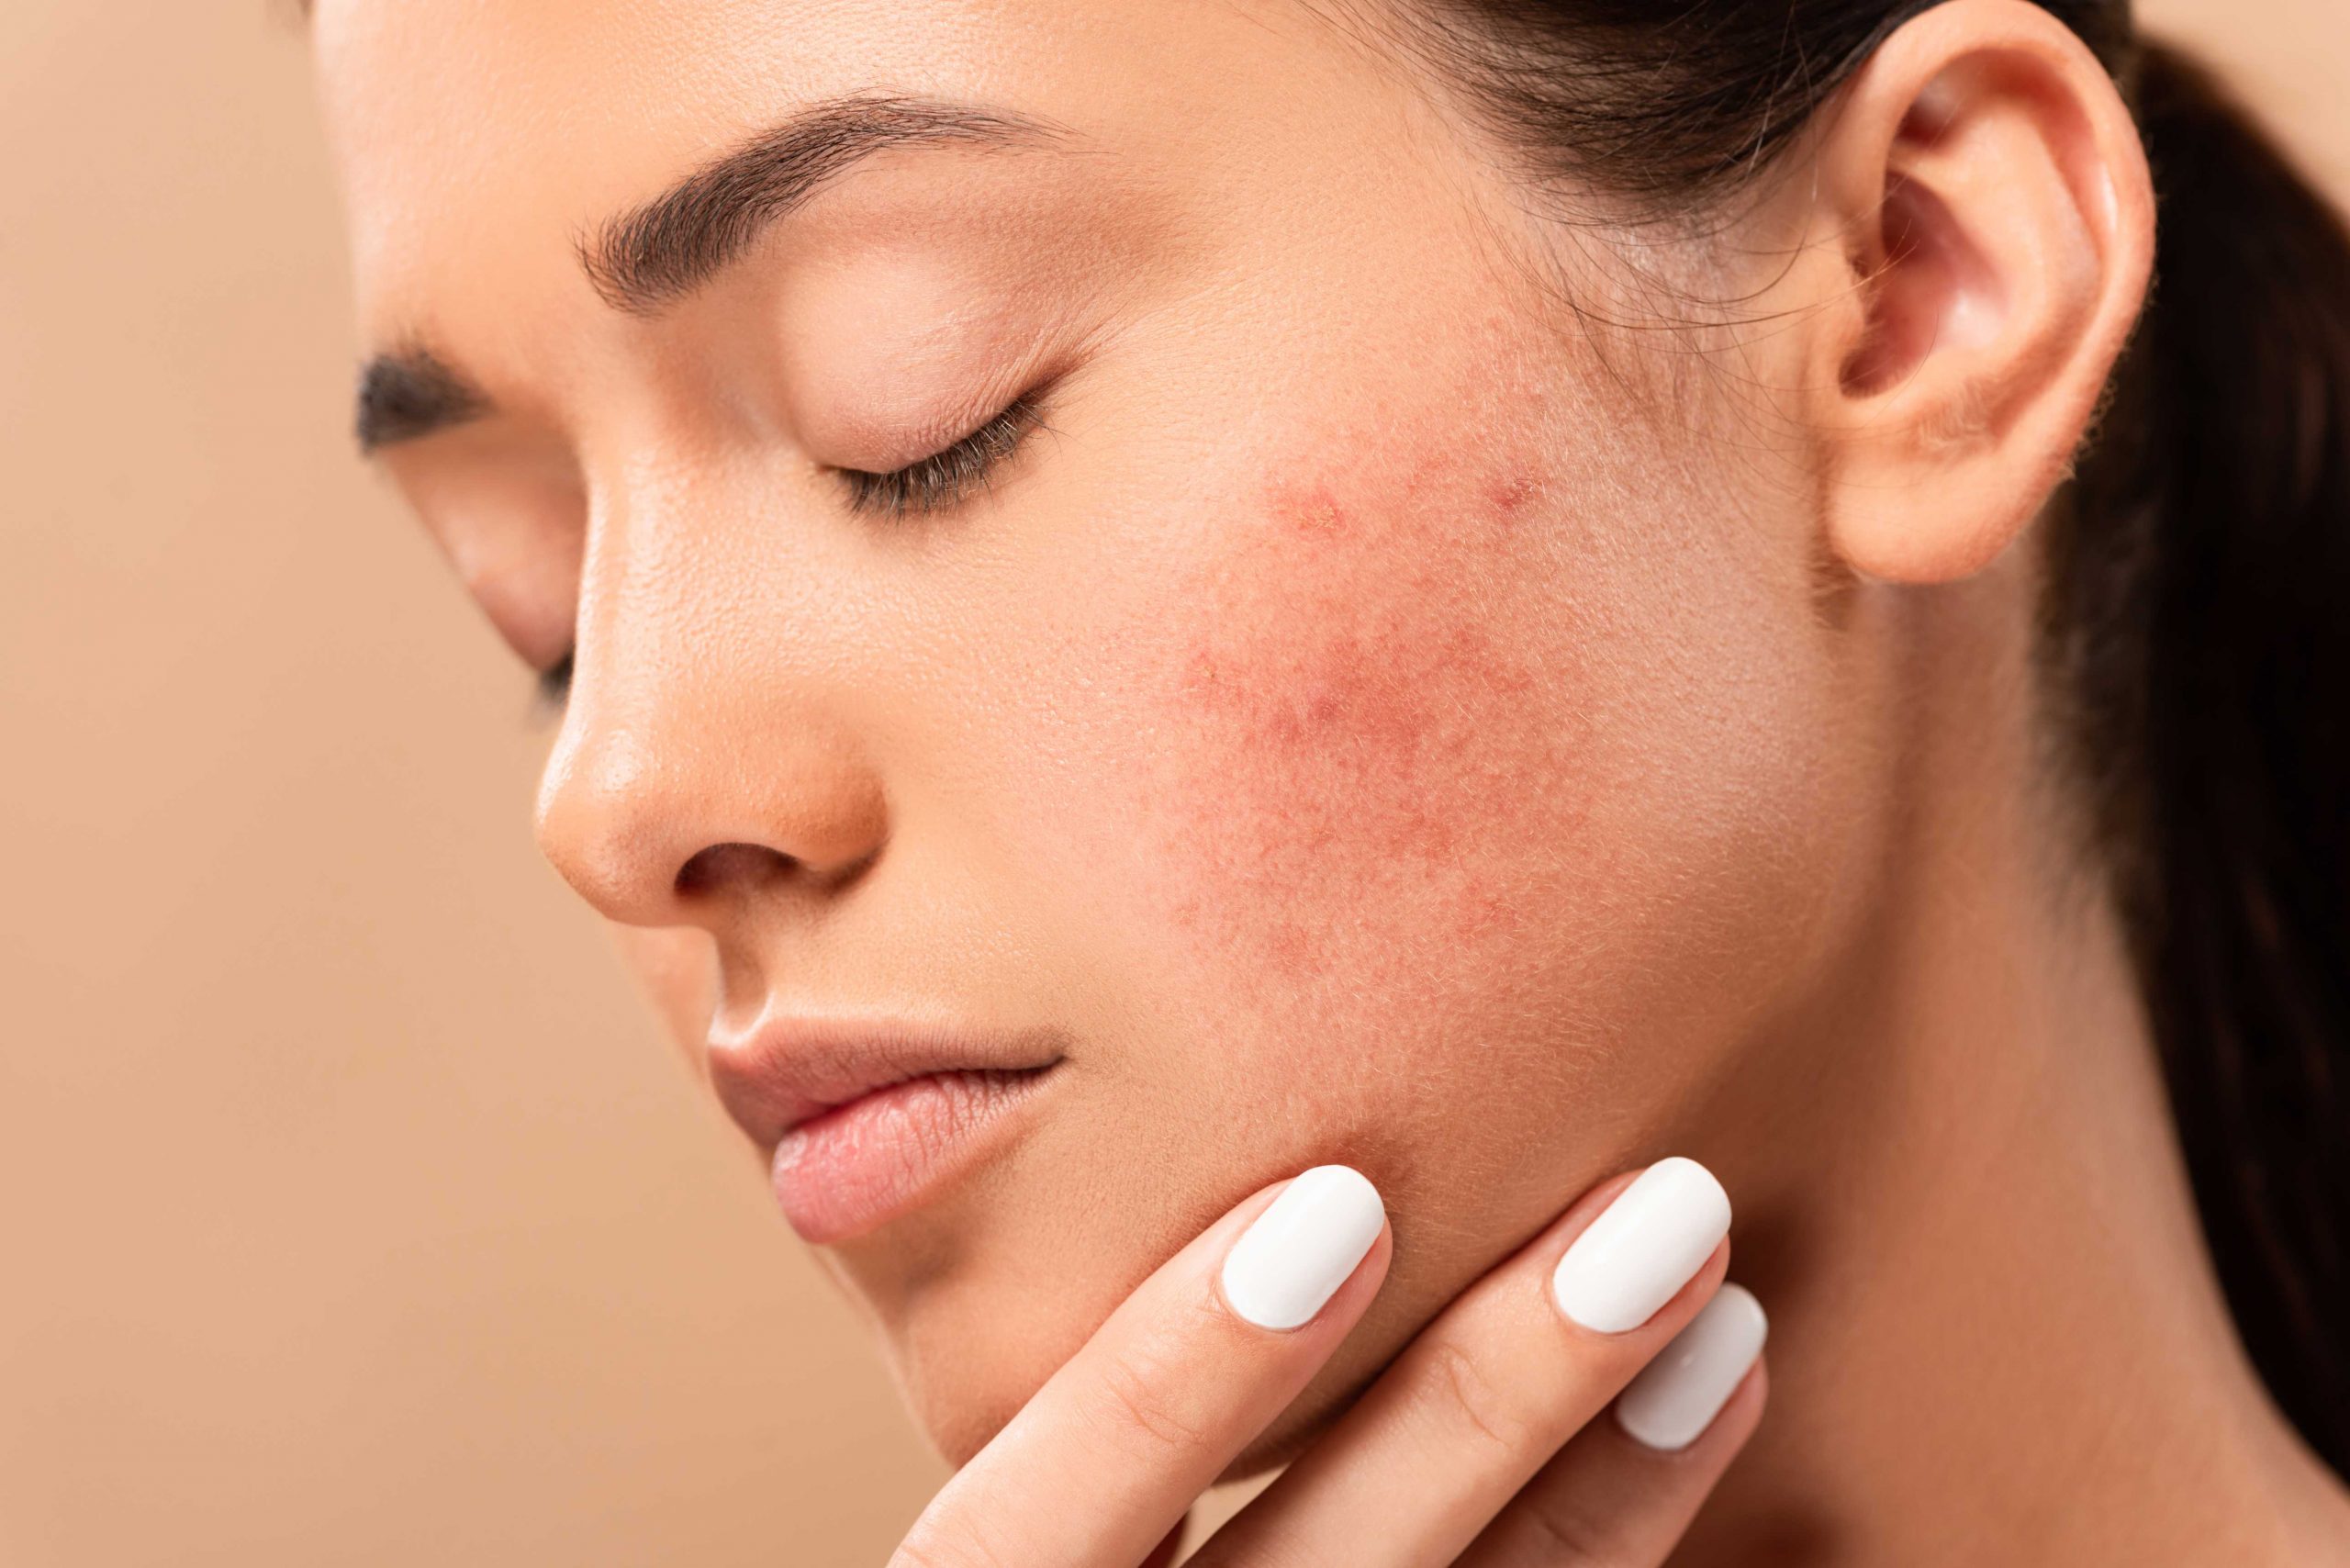 acne scars can affect more than just your skin